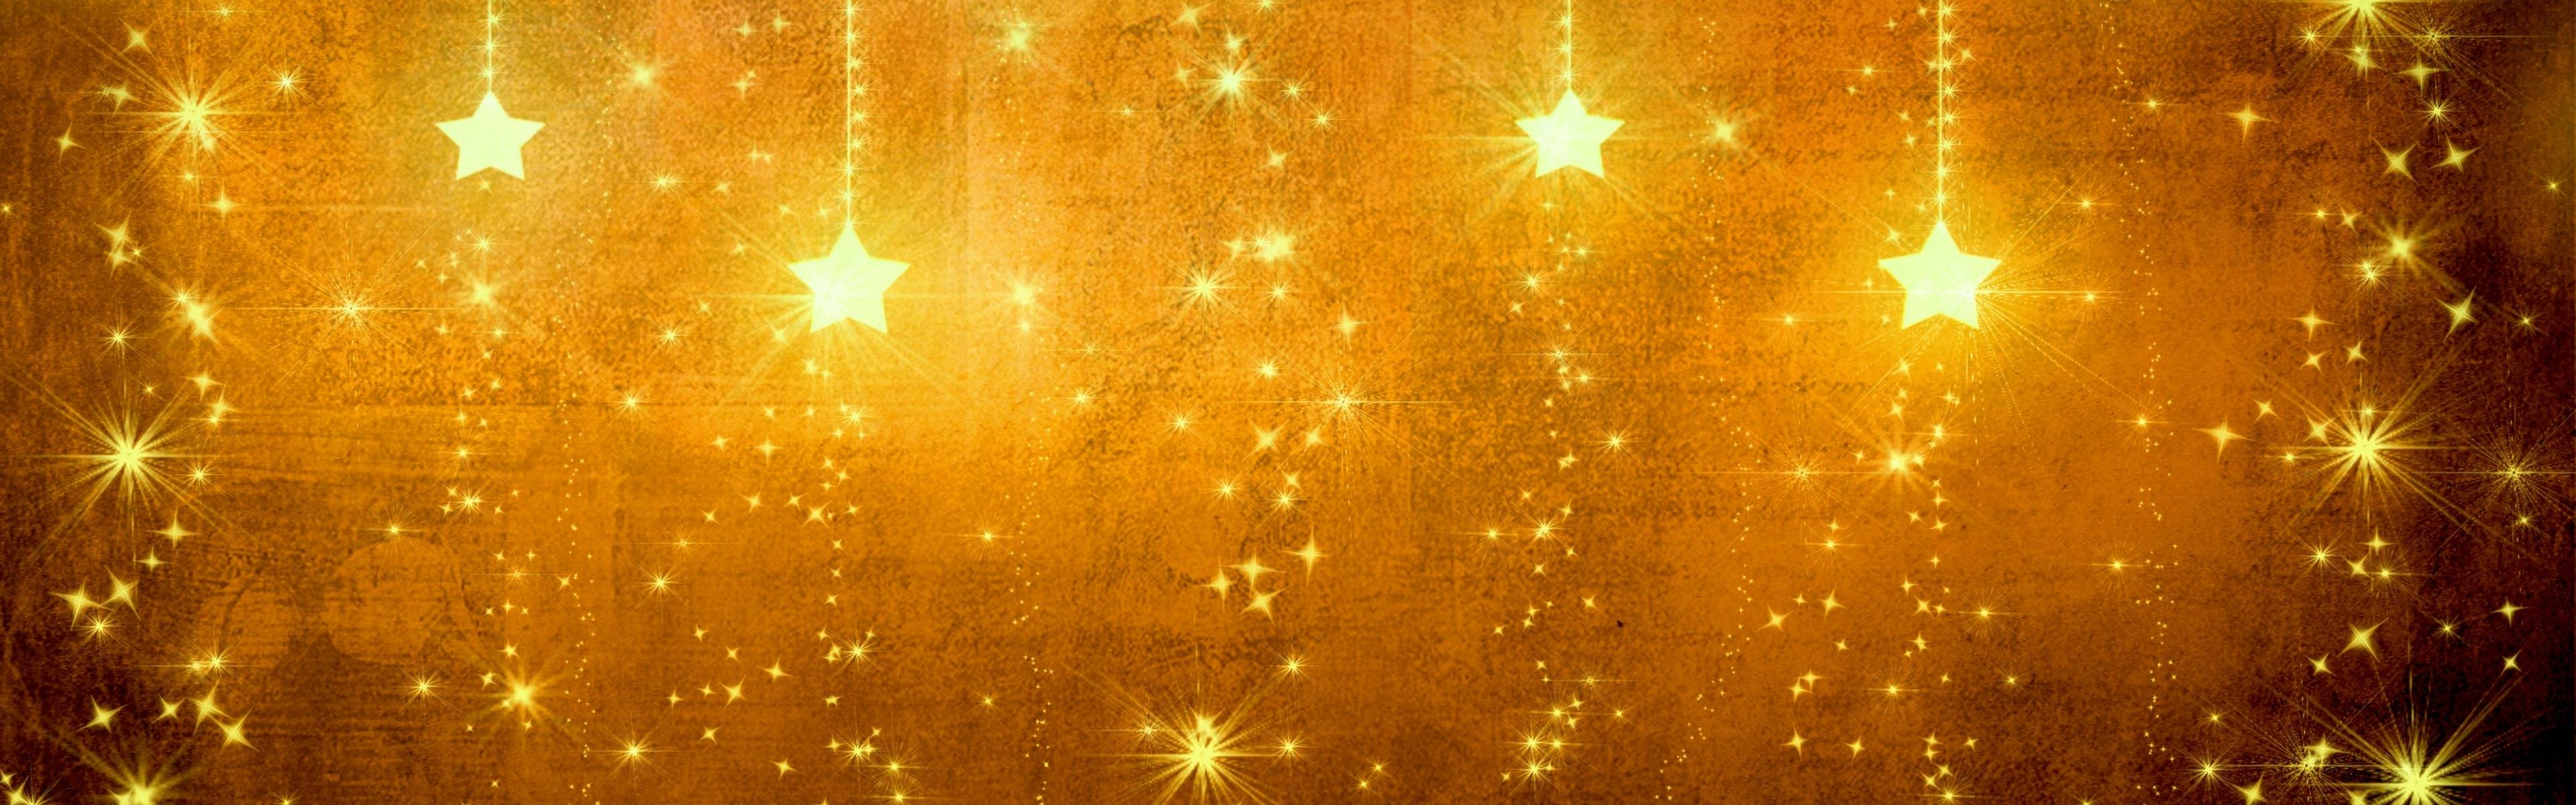 Download Wallpaper 3840x1200 star, gold, holiday, background